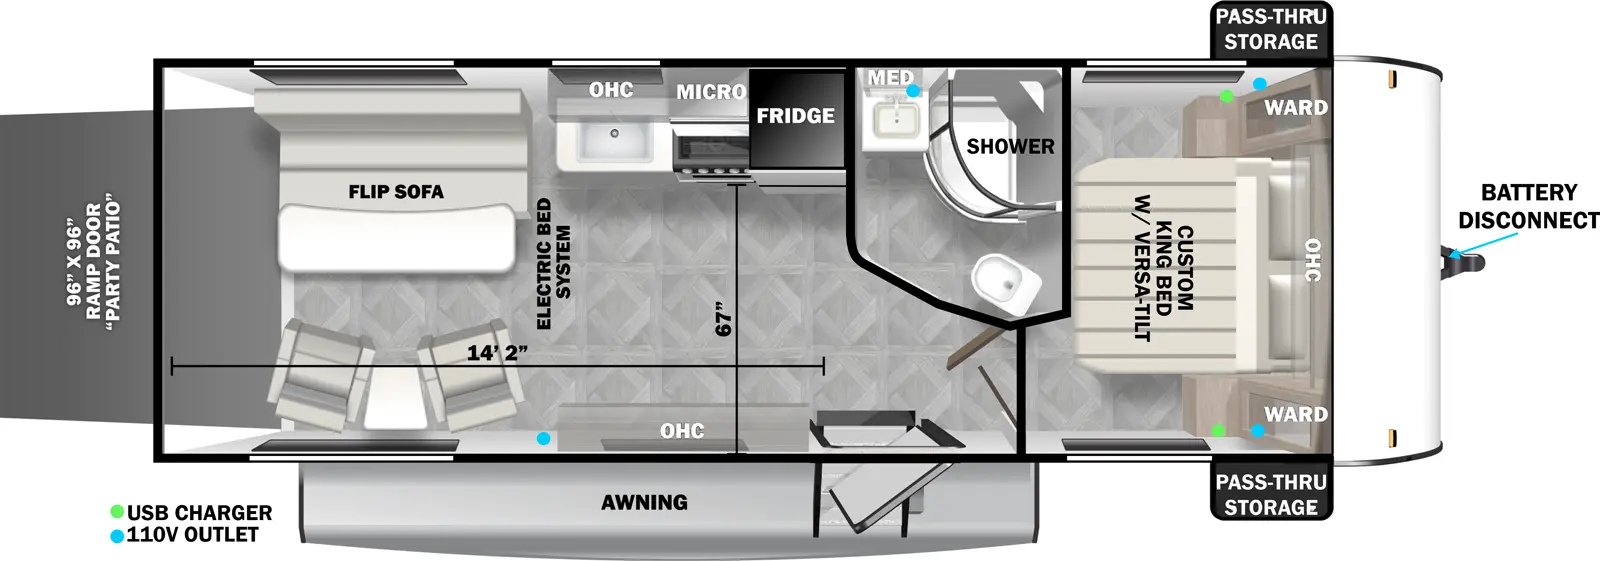 The 251SSXL has one entry, zero slideouts, and a rear ramp door. Exterior features front storage on each side, awning, and ramp door party patio. Interior layout front to back: custom king bed with overhead cabinet and wardrobes on each side; off-door side full bathroom with medicine cabinet; entry door; off-door side refrigerator, microwave, cooktop, kitchen cabinet with sink, and overhead cabinet; door side overhead cabinet; rear off-door side flip sofa with table, chairs with end table, and electric bed system. Garage dimensions: 14 foot 2 inch length, 67 inch width, 96 inch by 96 inch ramp door.